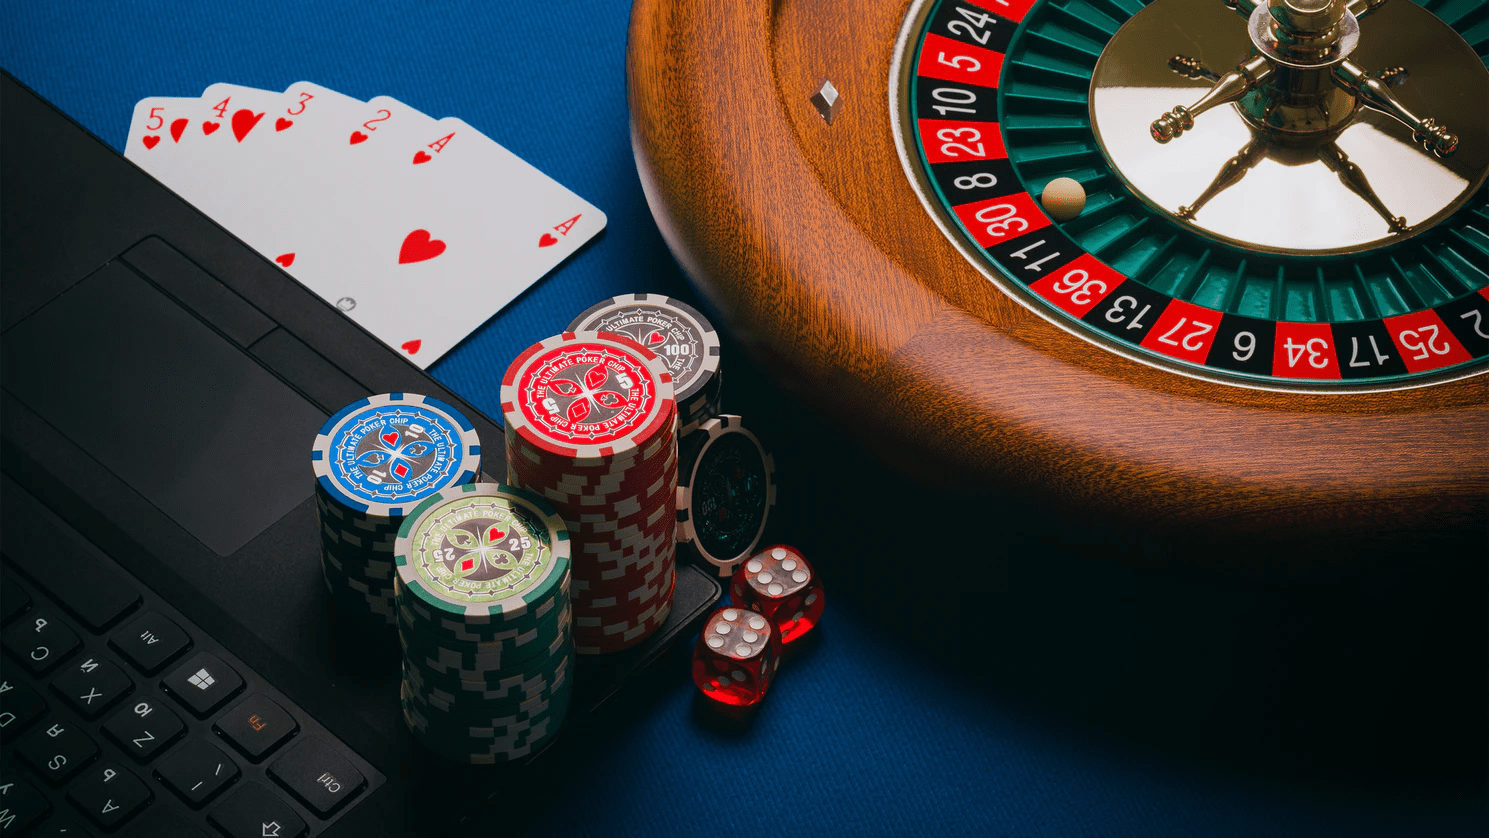 online casinos For Business: The Rules Are Made To Be Broken